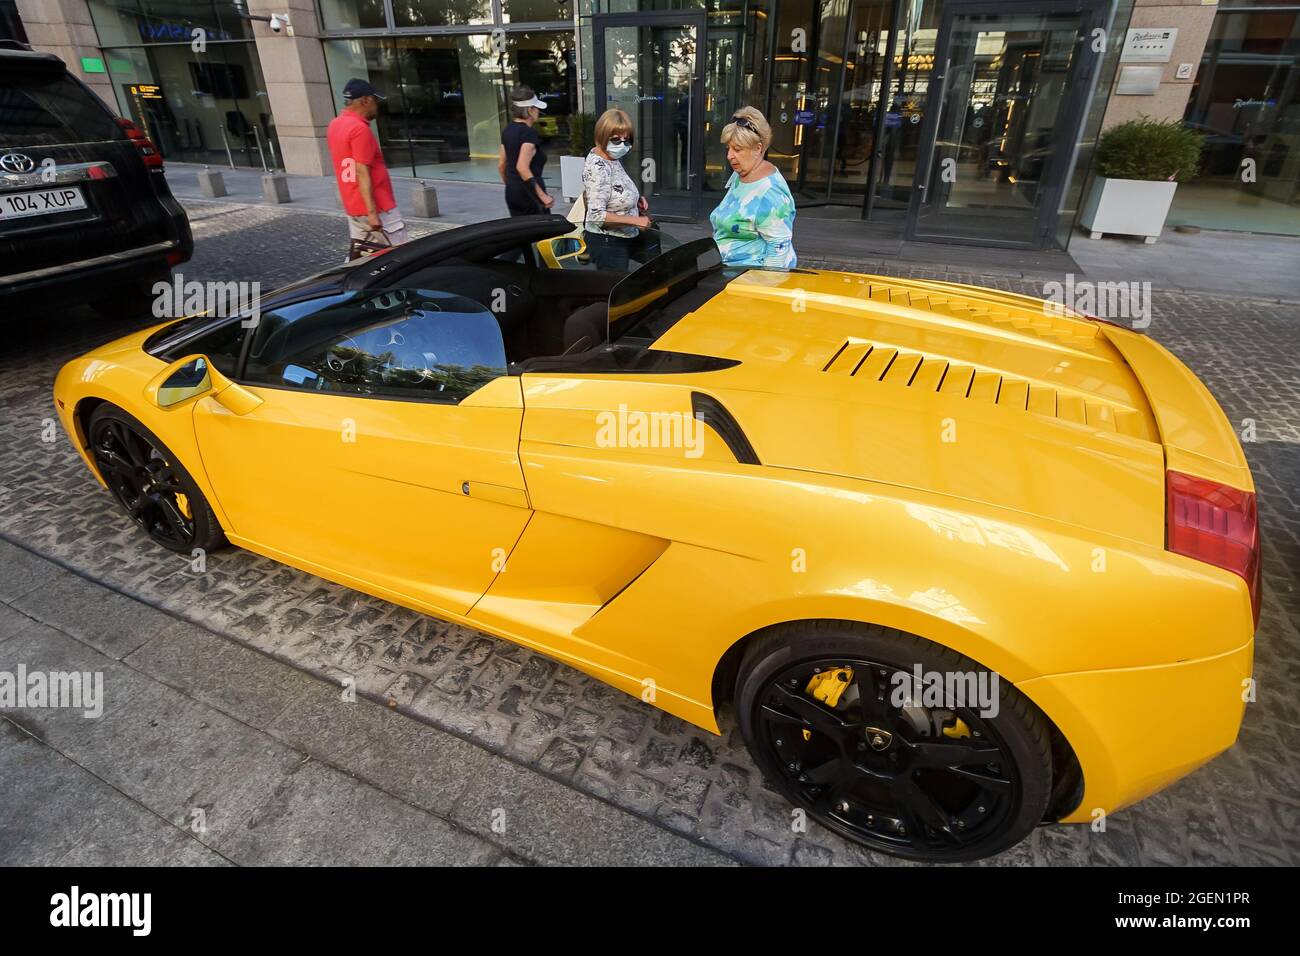 Bucharest, Romania - August 17, 2021: An yellow 2006 Lamborghini Gallardo Spyder is parked in front of the entrance to the Radisson Blu Hotel Buchares Stock Photo